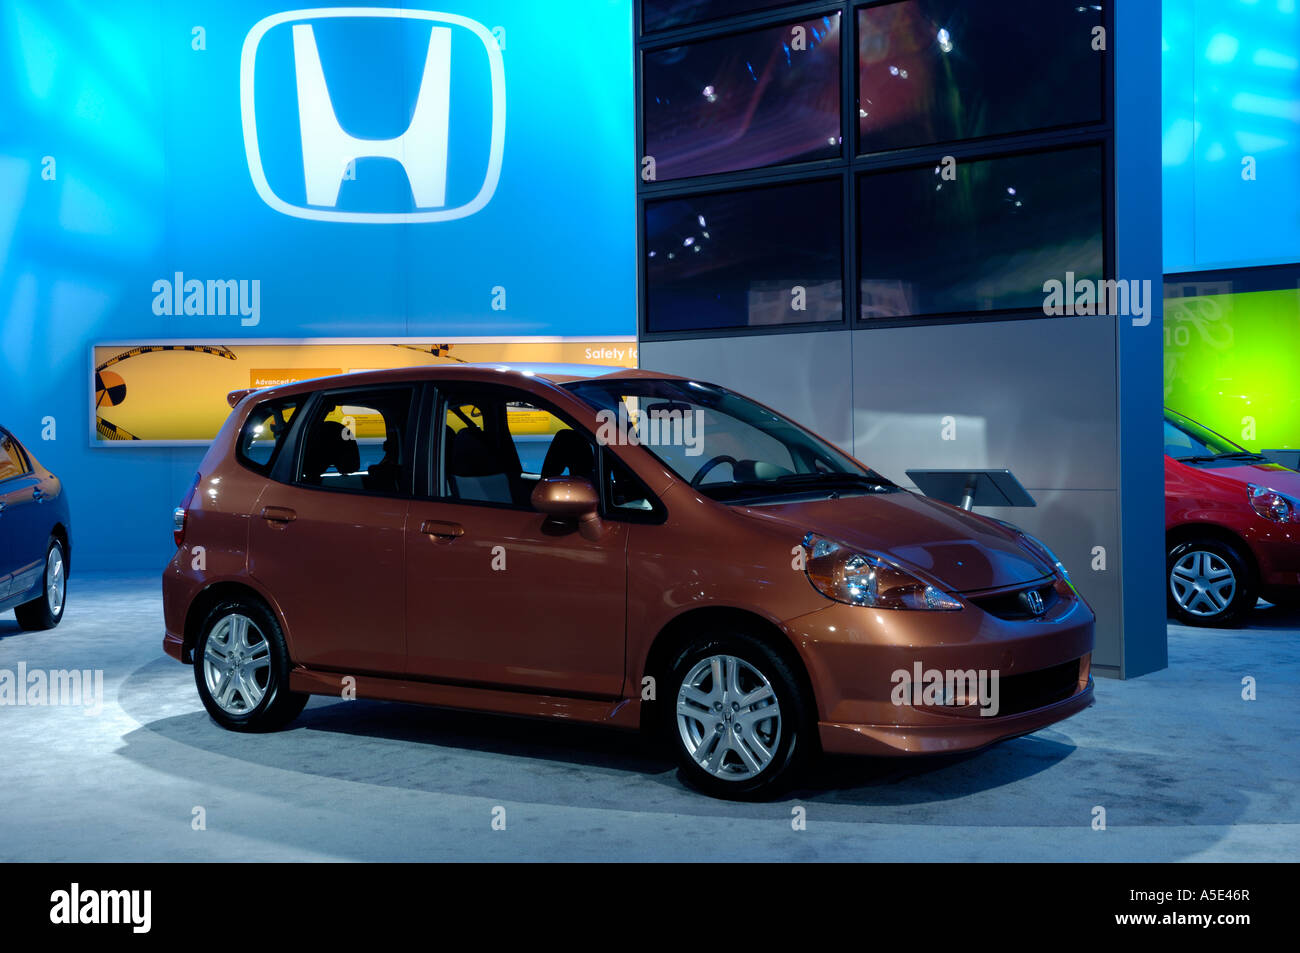 2007 Honda Fit at the 2007 North American International Auto Show in Detroit Michigan USA Stock Photo